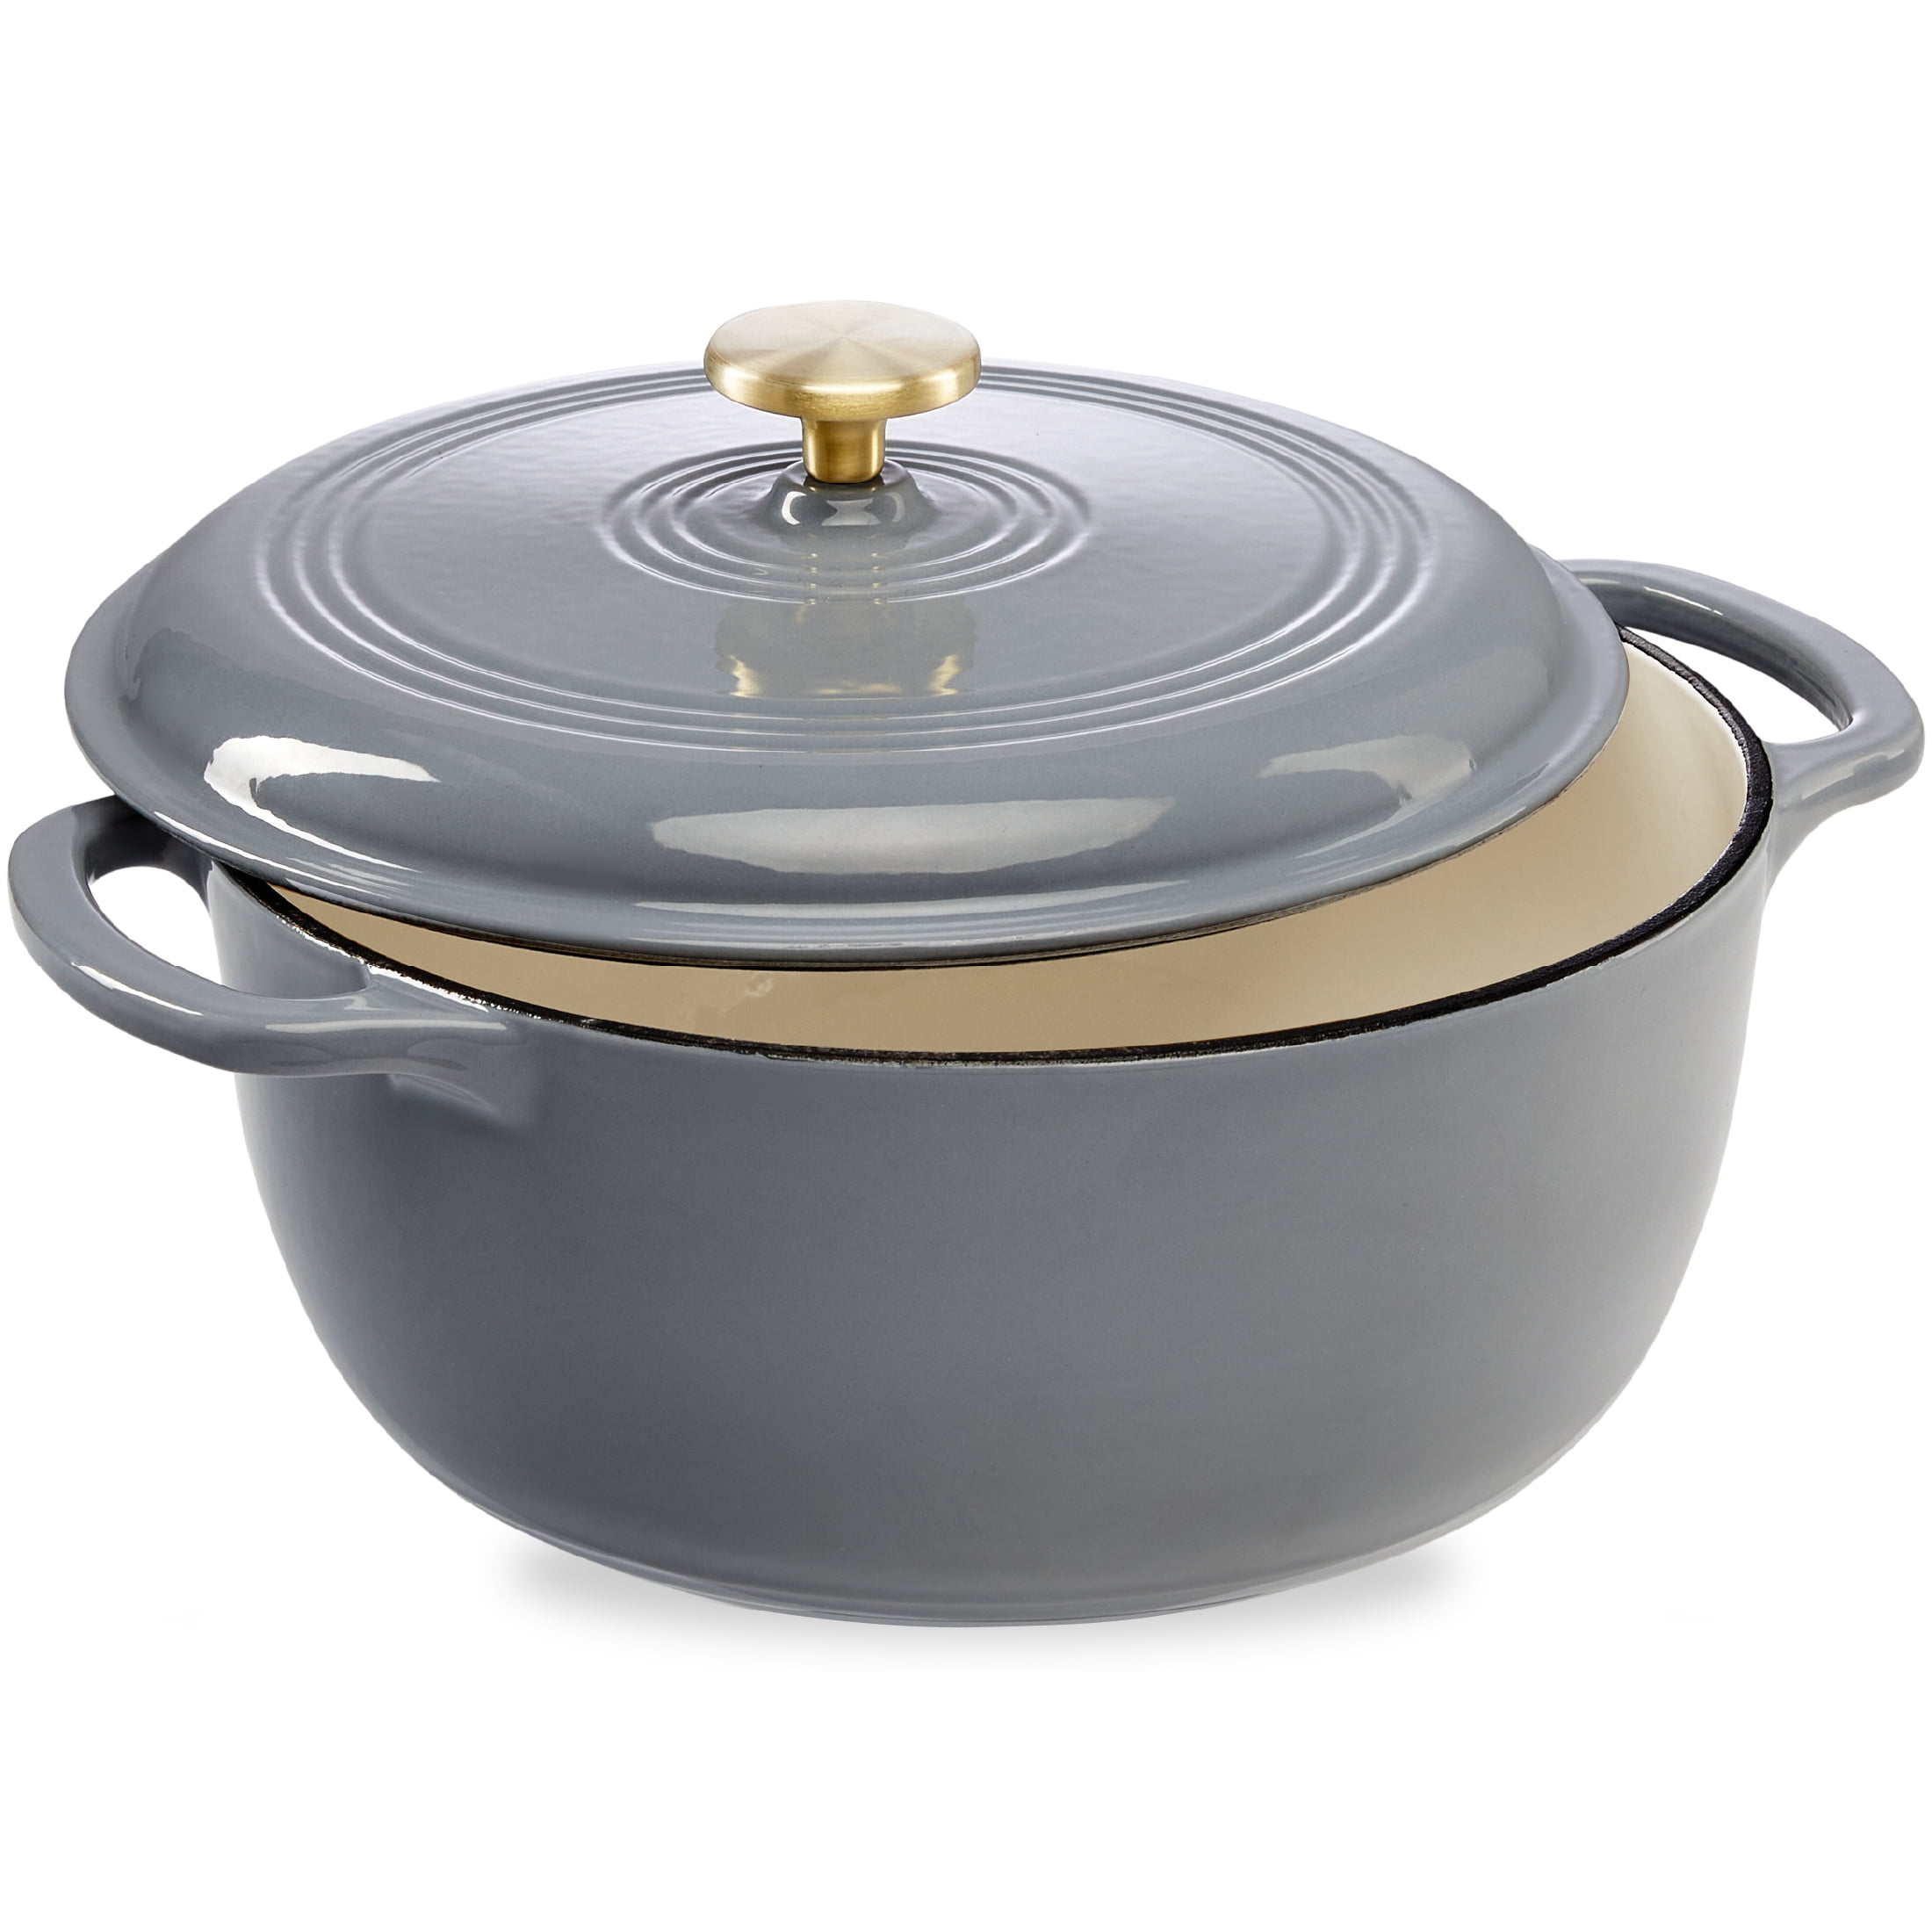 SAVEUR Selects Enameled Cast Iron Oval Dutch Oven 6 Quart, Classic